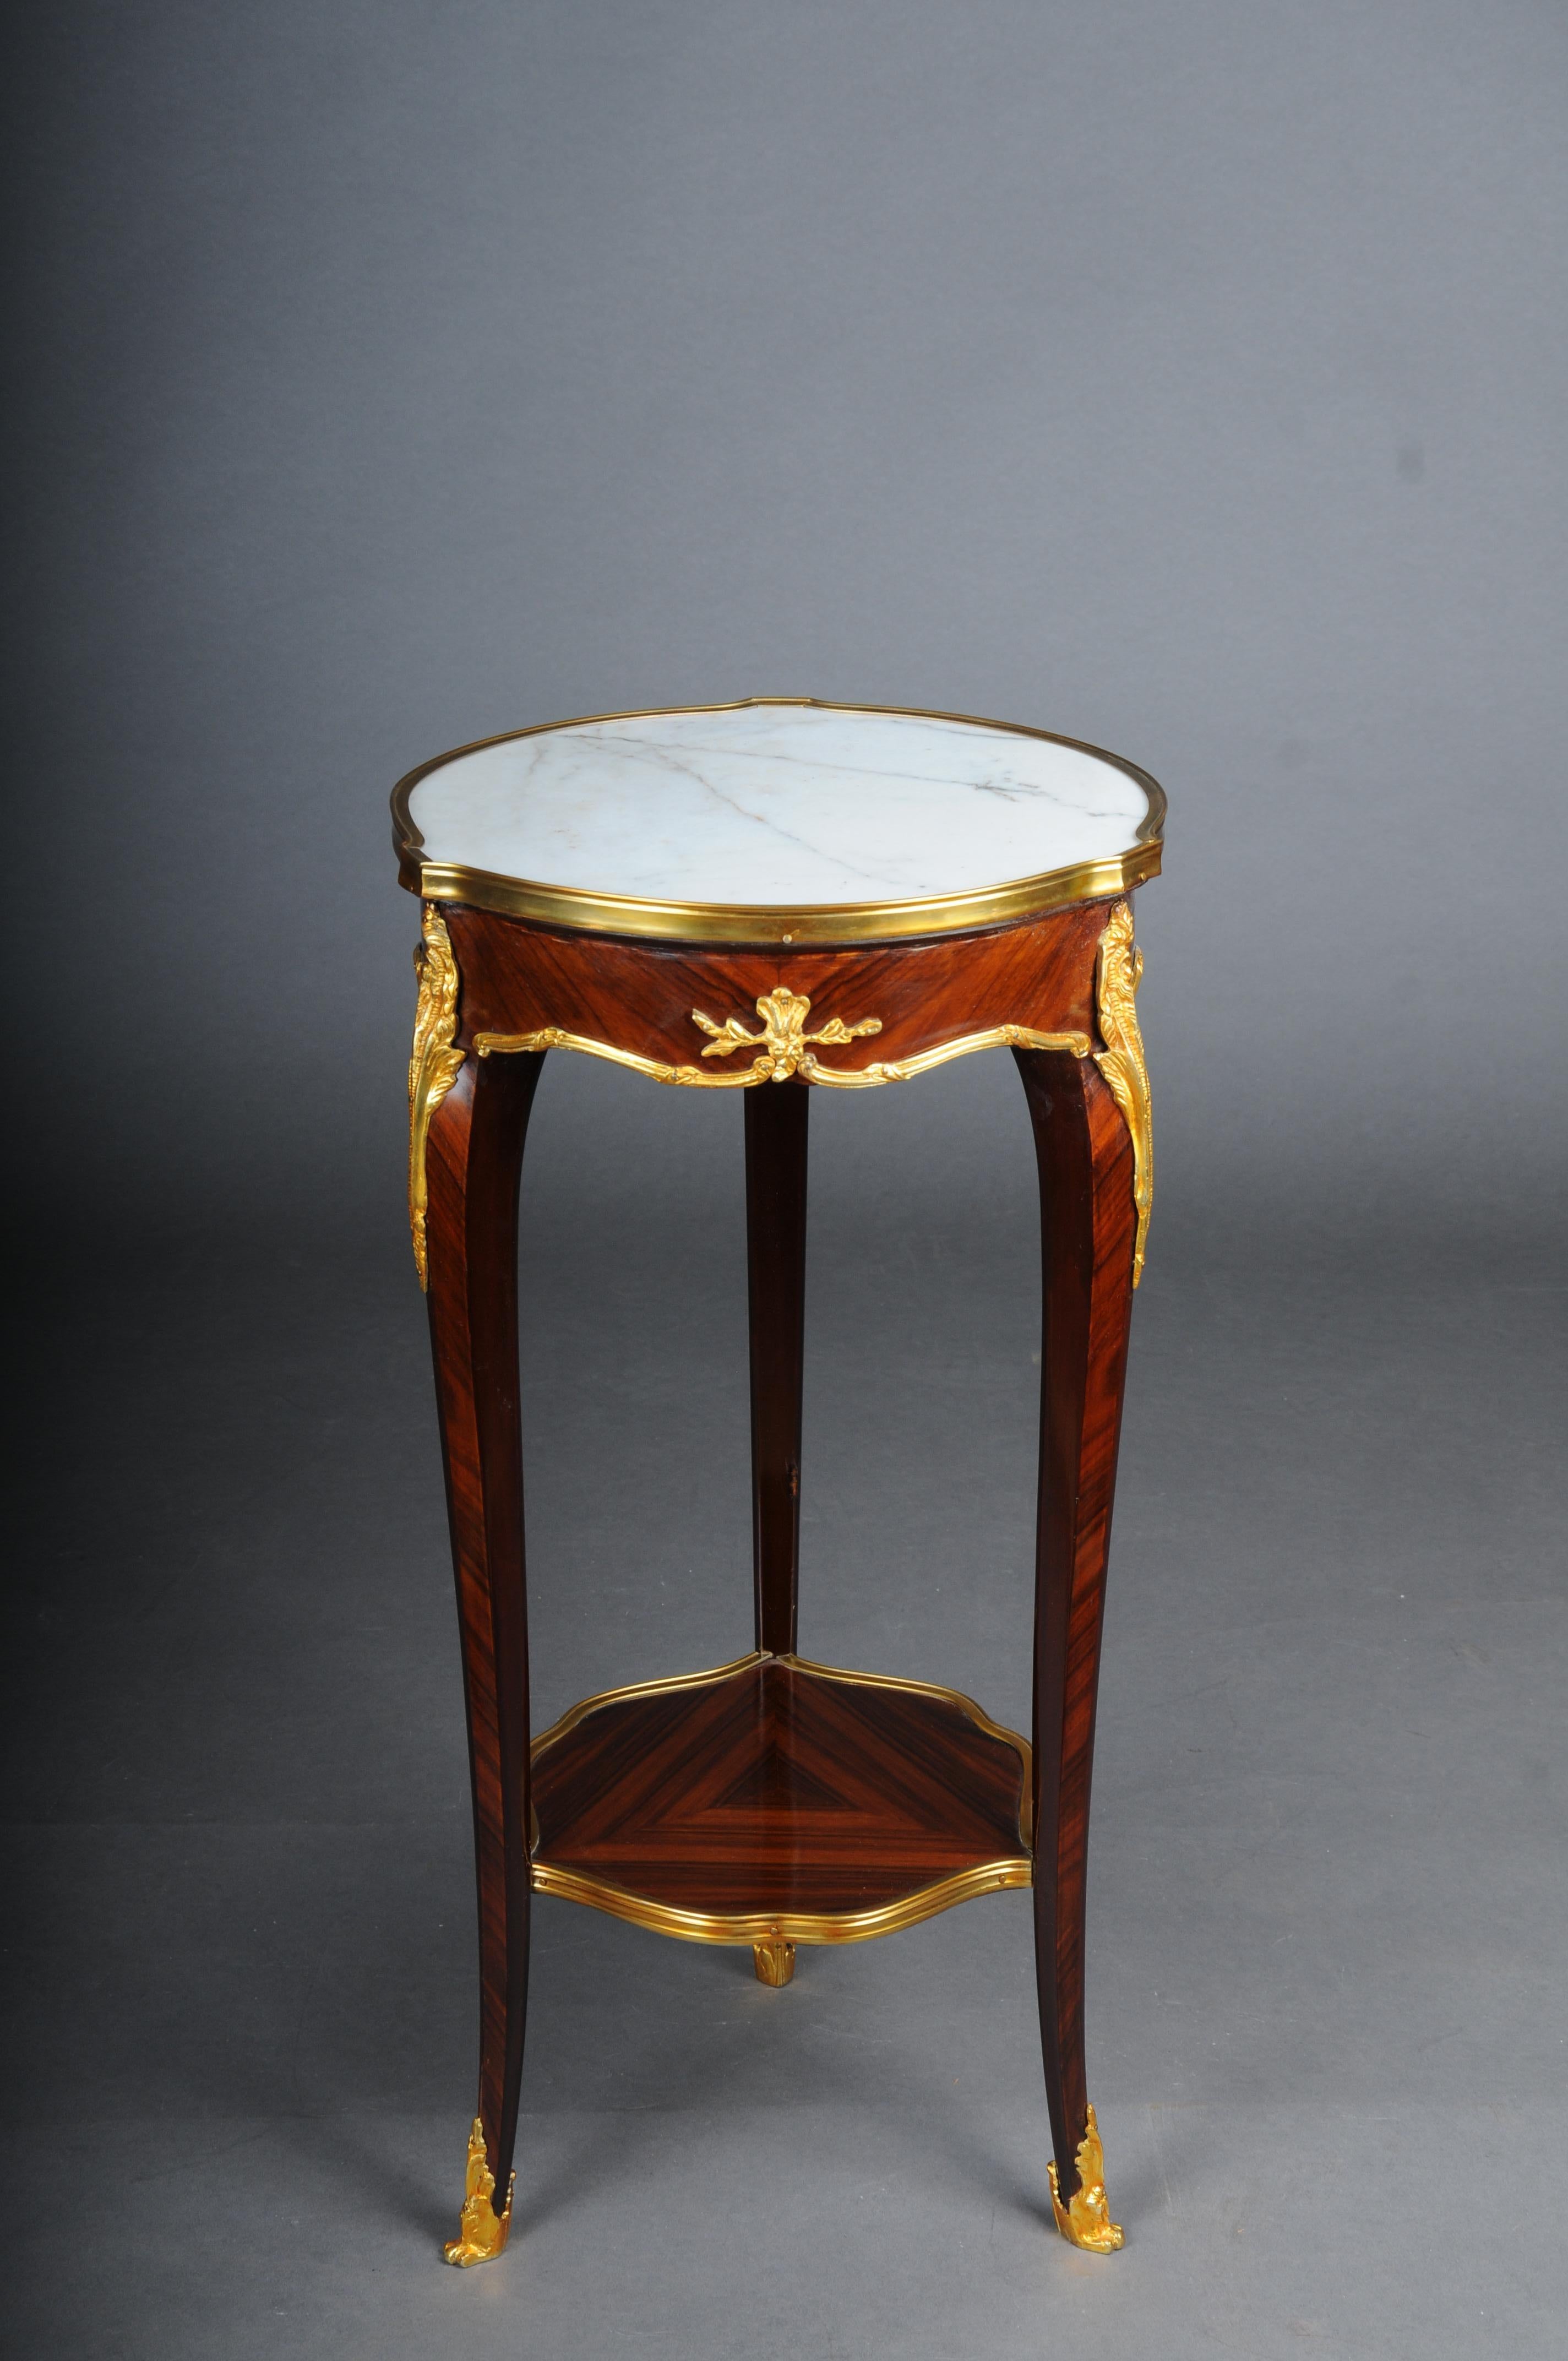 20th Century French Salon Side Table in Louis XV after F. Linke, Beech

Solid wood side table in Louis XV. Slightly convex and concave, carcass, flanked by solid corner glaciers on high, elegantly curved legs, connected below by a curly brass frame